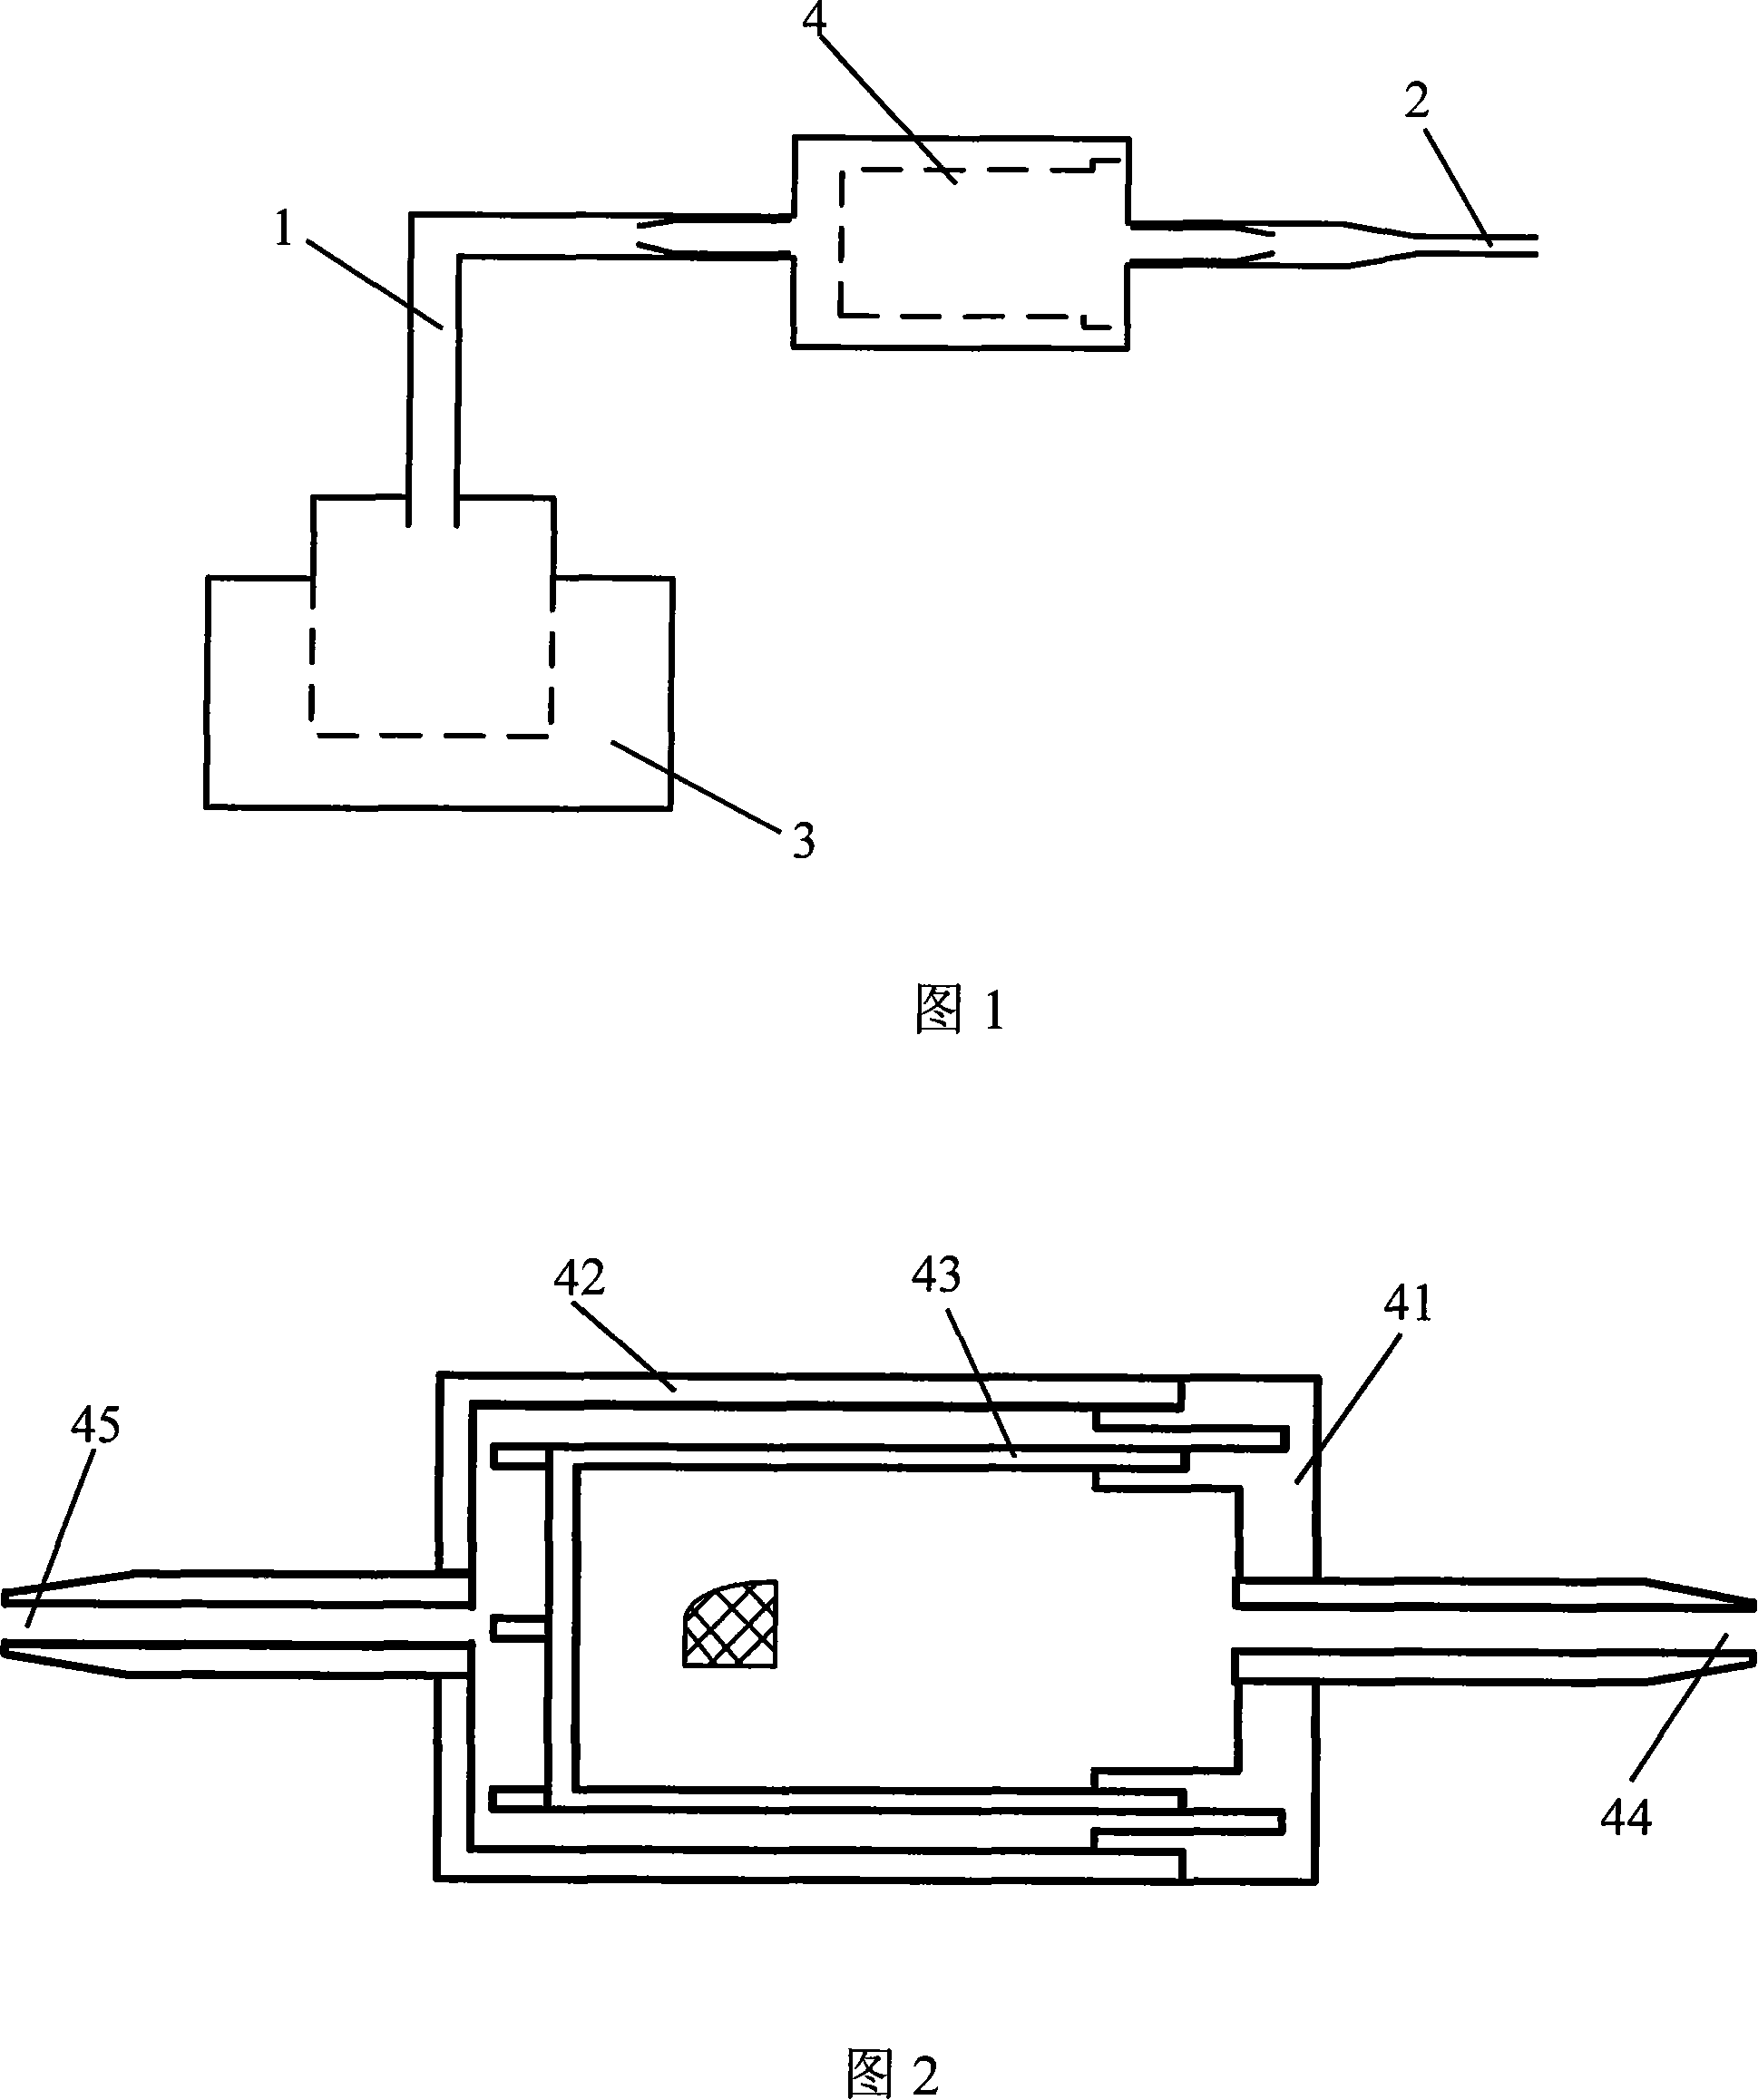 Reamed product passing through negative pressure catheter collecting device